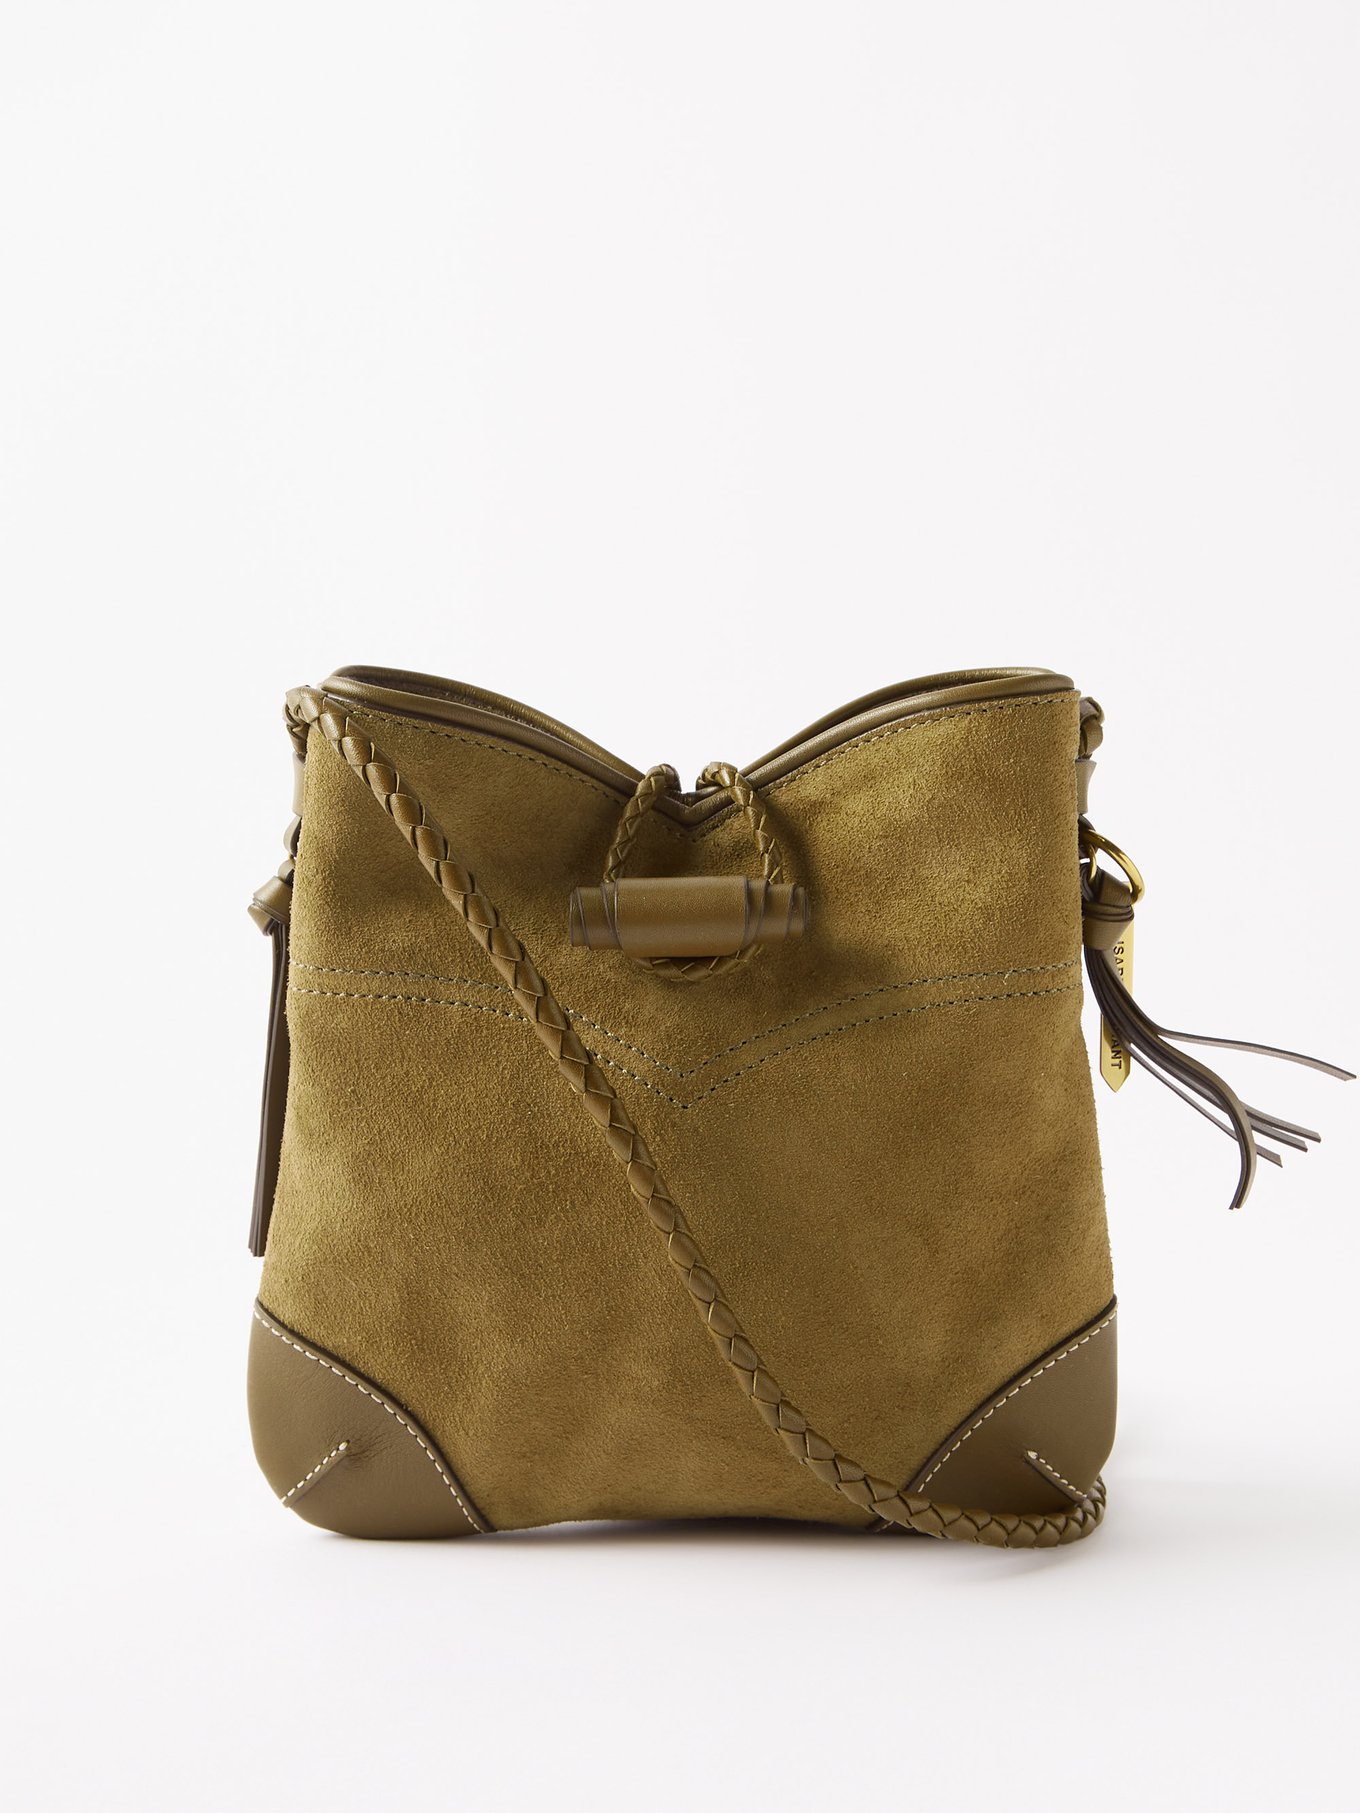 Isabel Marant Taggy Braided Leather And Suede Cross-body Bag in Tan Brown Womens Bags Crossbody bags and purses 